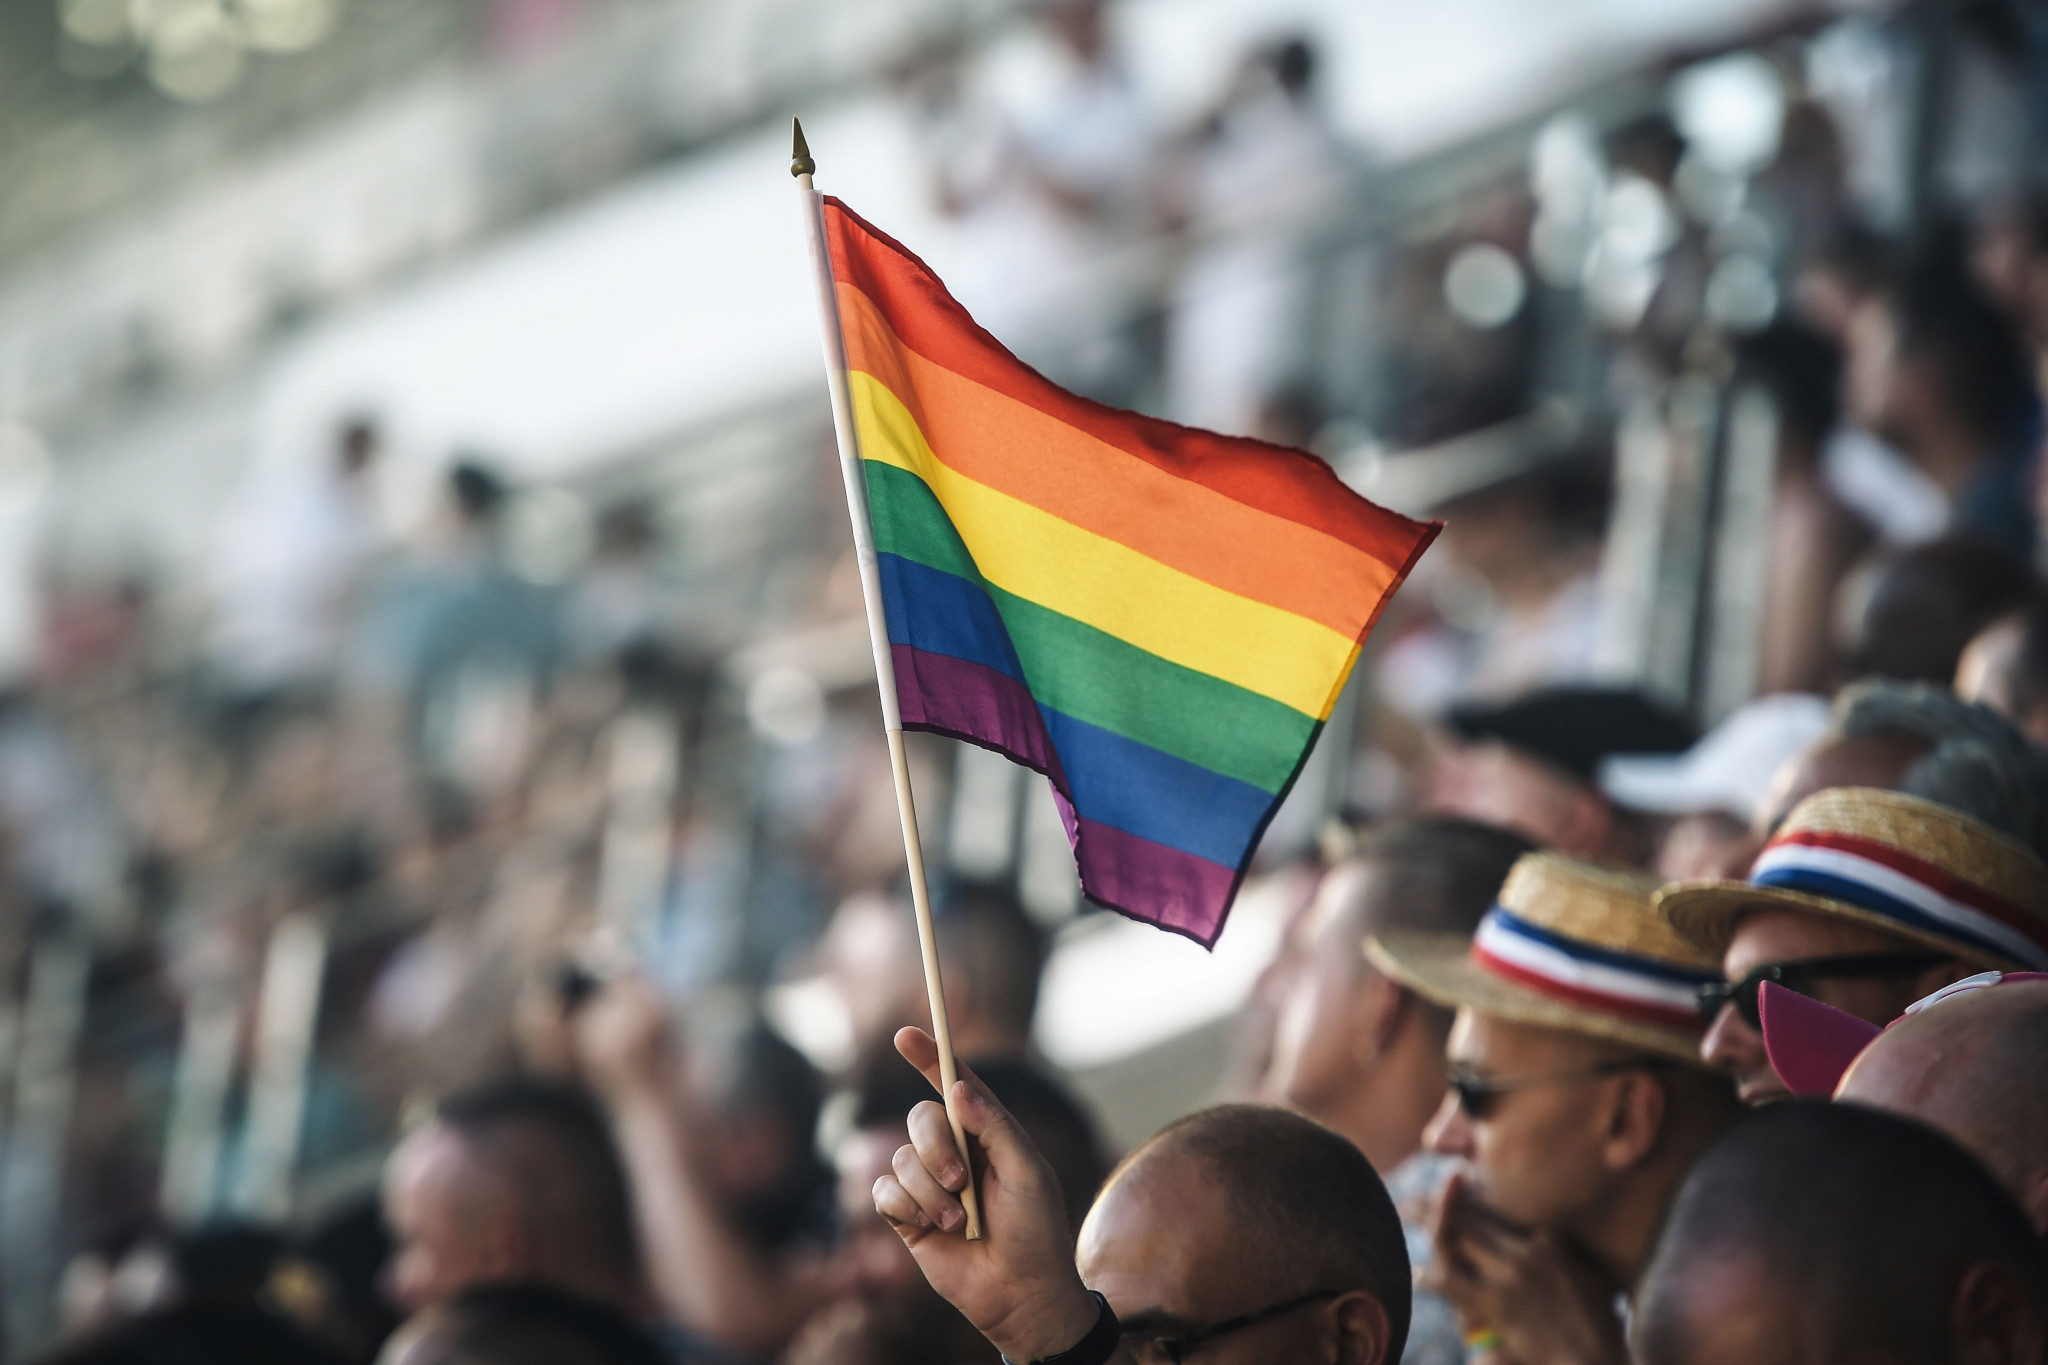 Hong Kong and Guadalajara are set to host the 11th edition of the Gay Games ©Getty Images